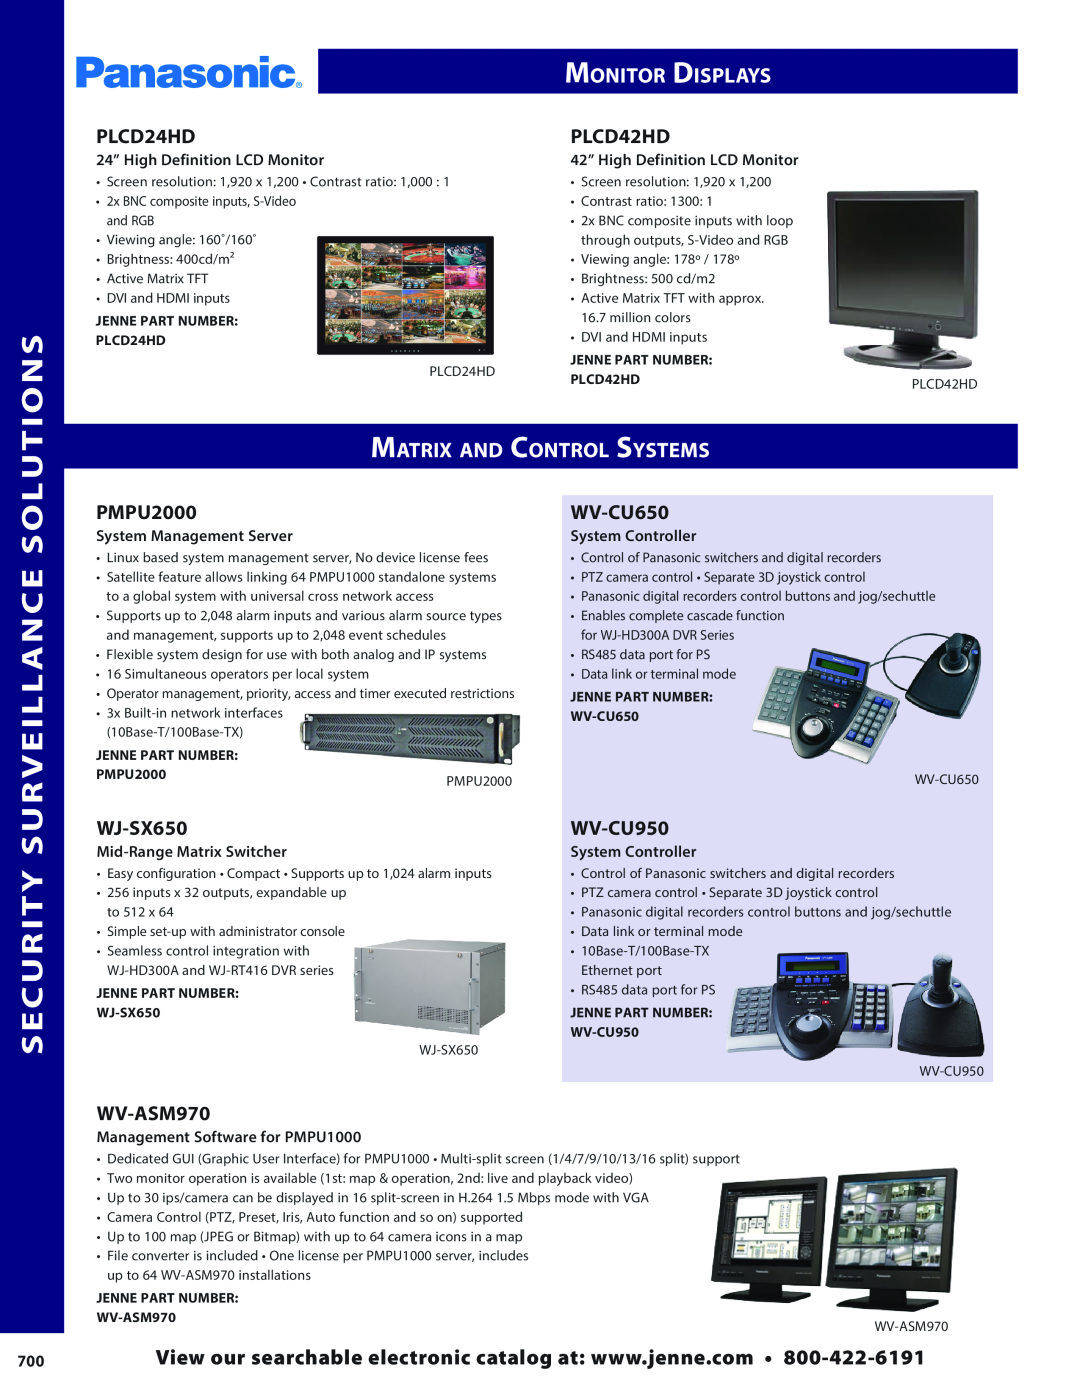 Panasonic PMPU2000 Security Surveillance Solutions, Monitor Displays, Matrix and Control Systems, System Management Server 